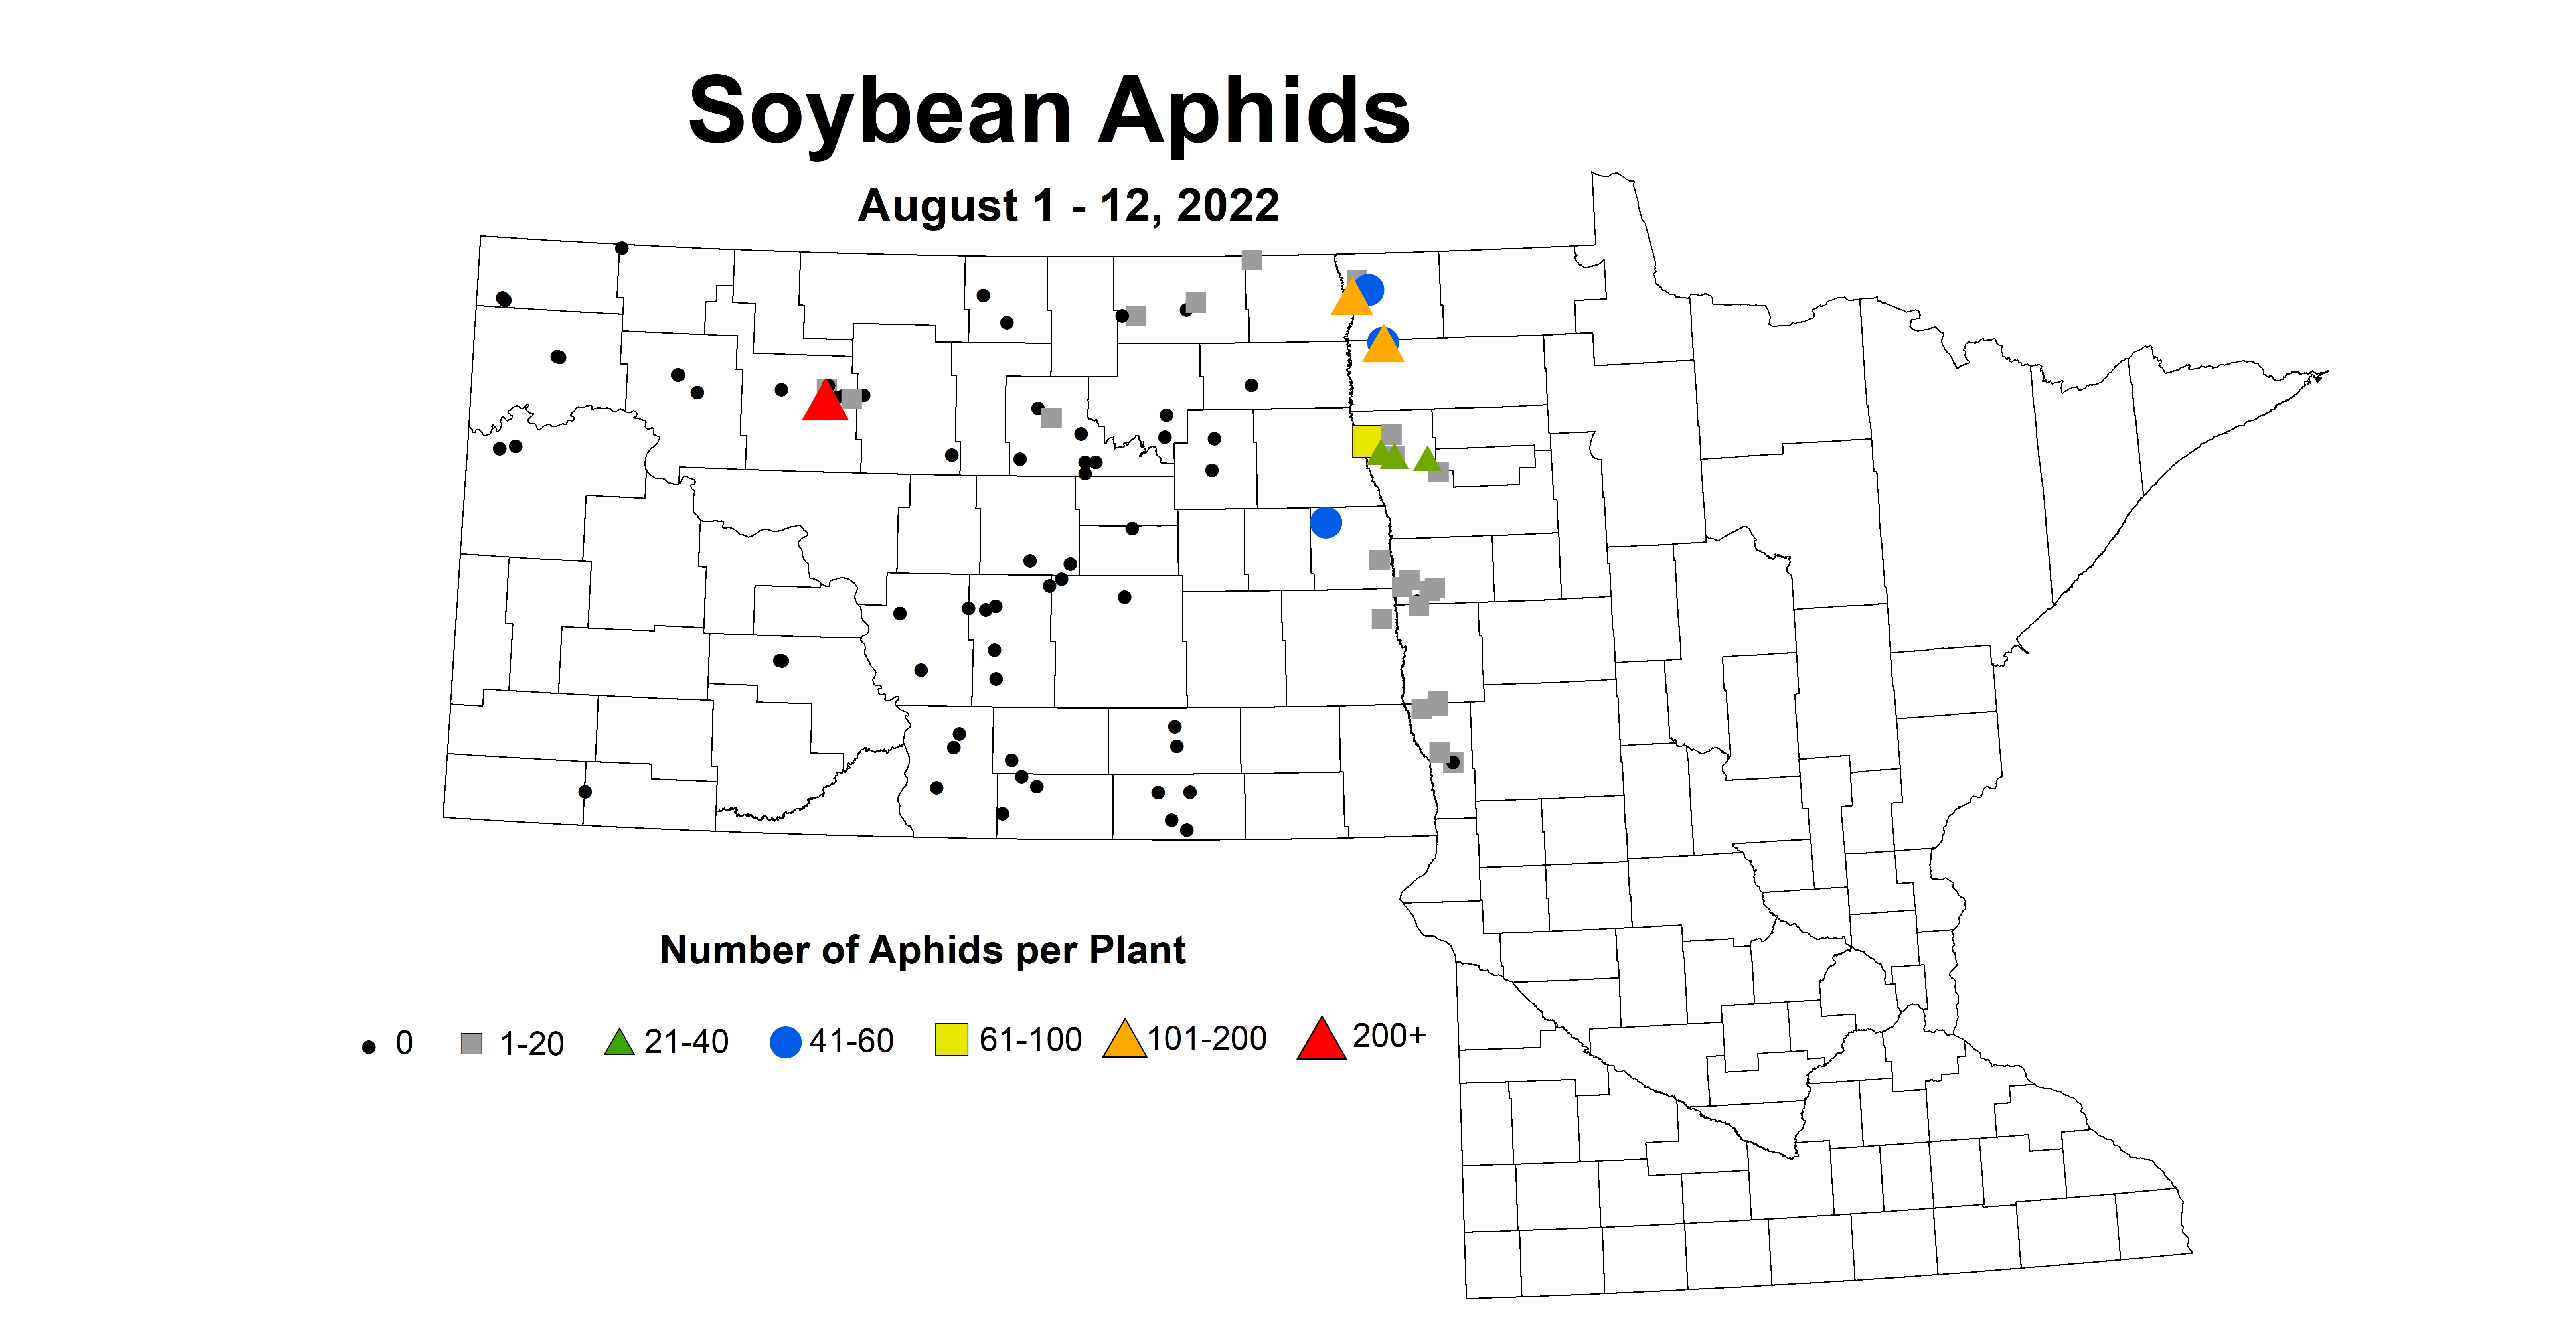 soybean aphids average number 2022 8.1-8.12